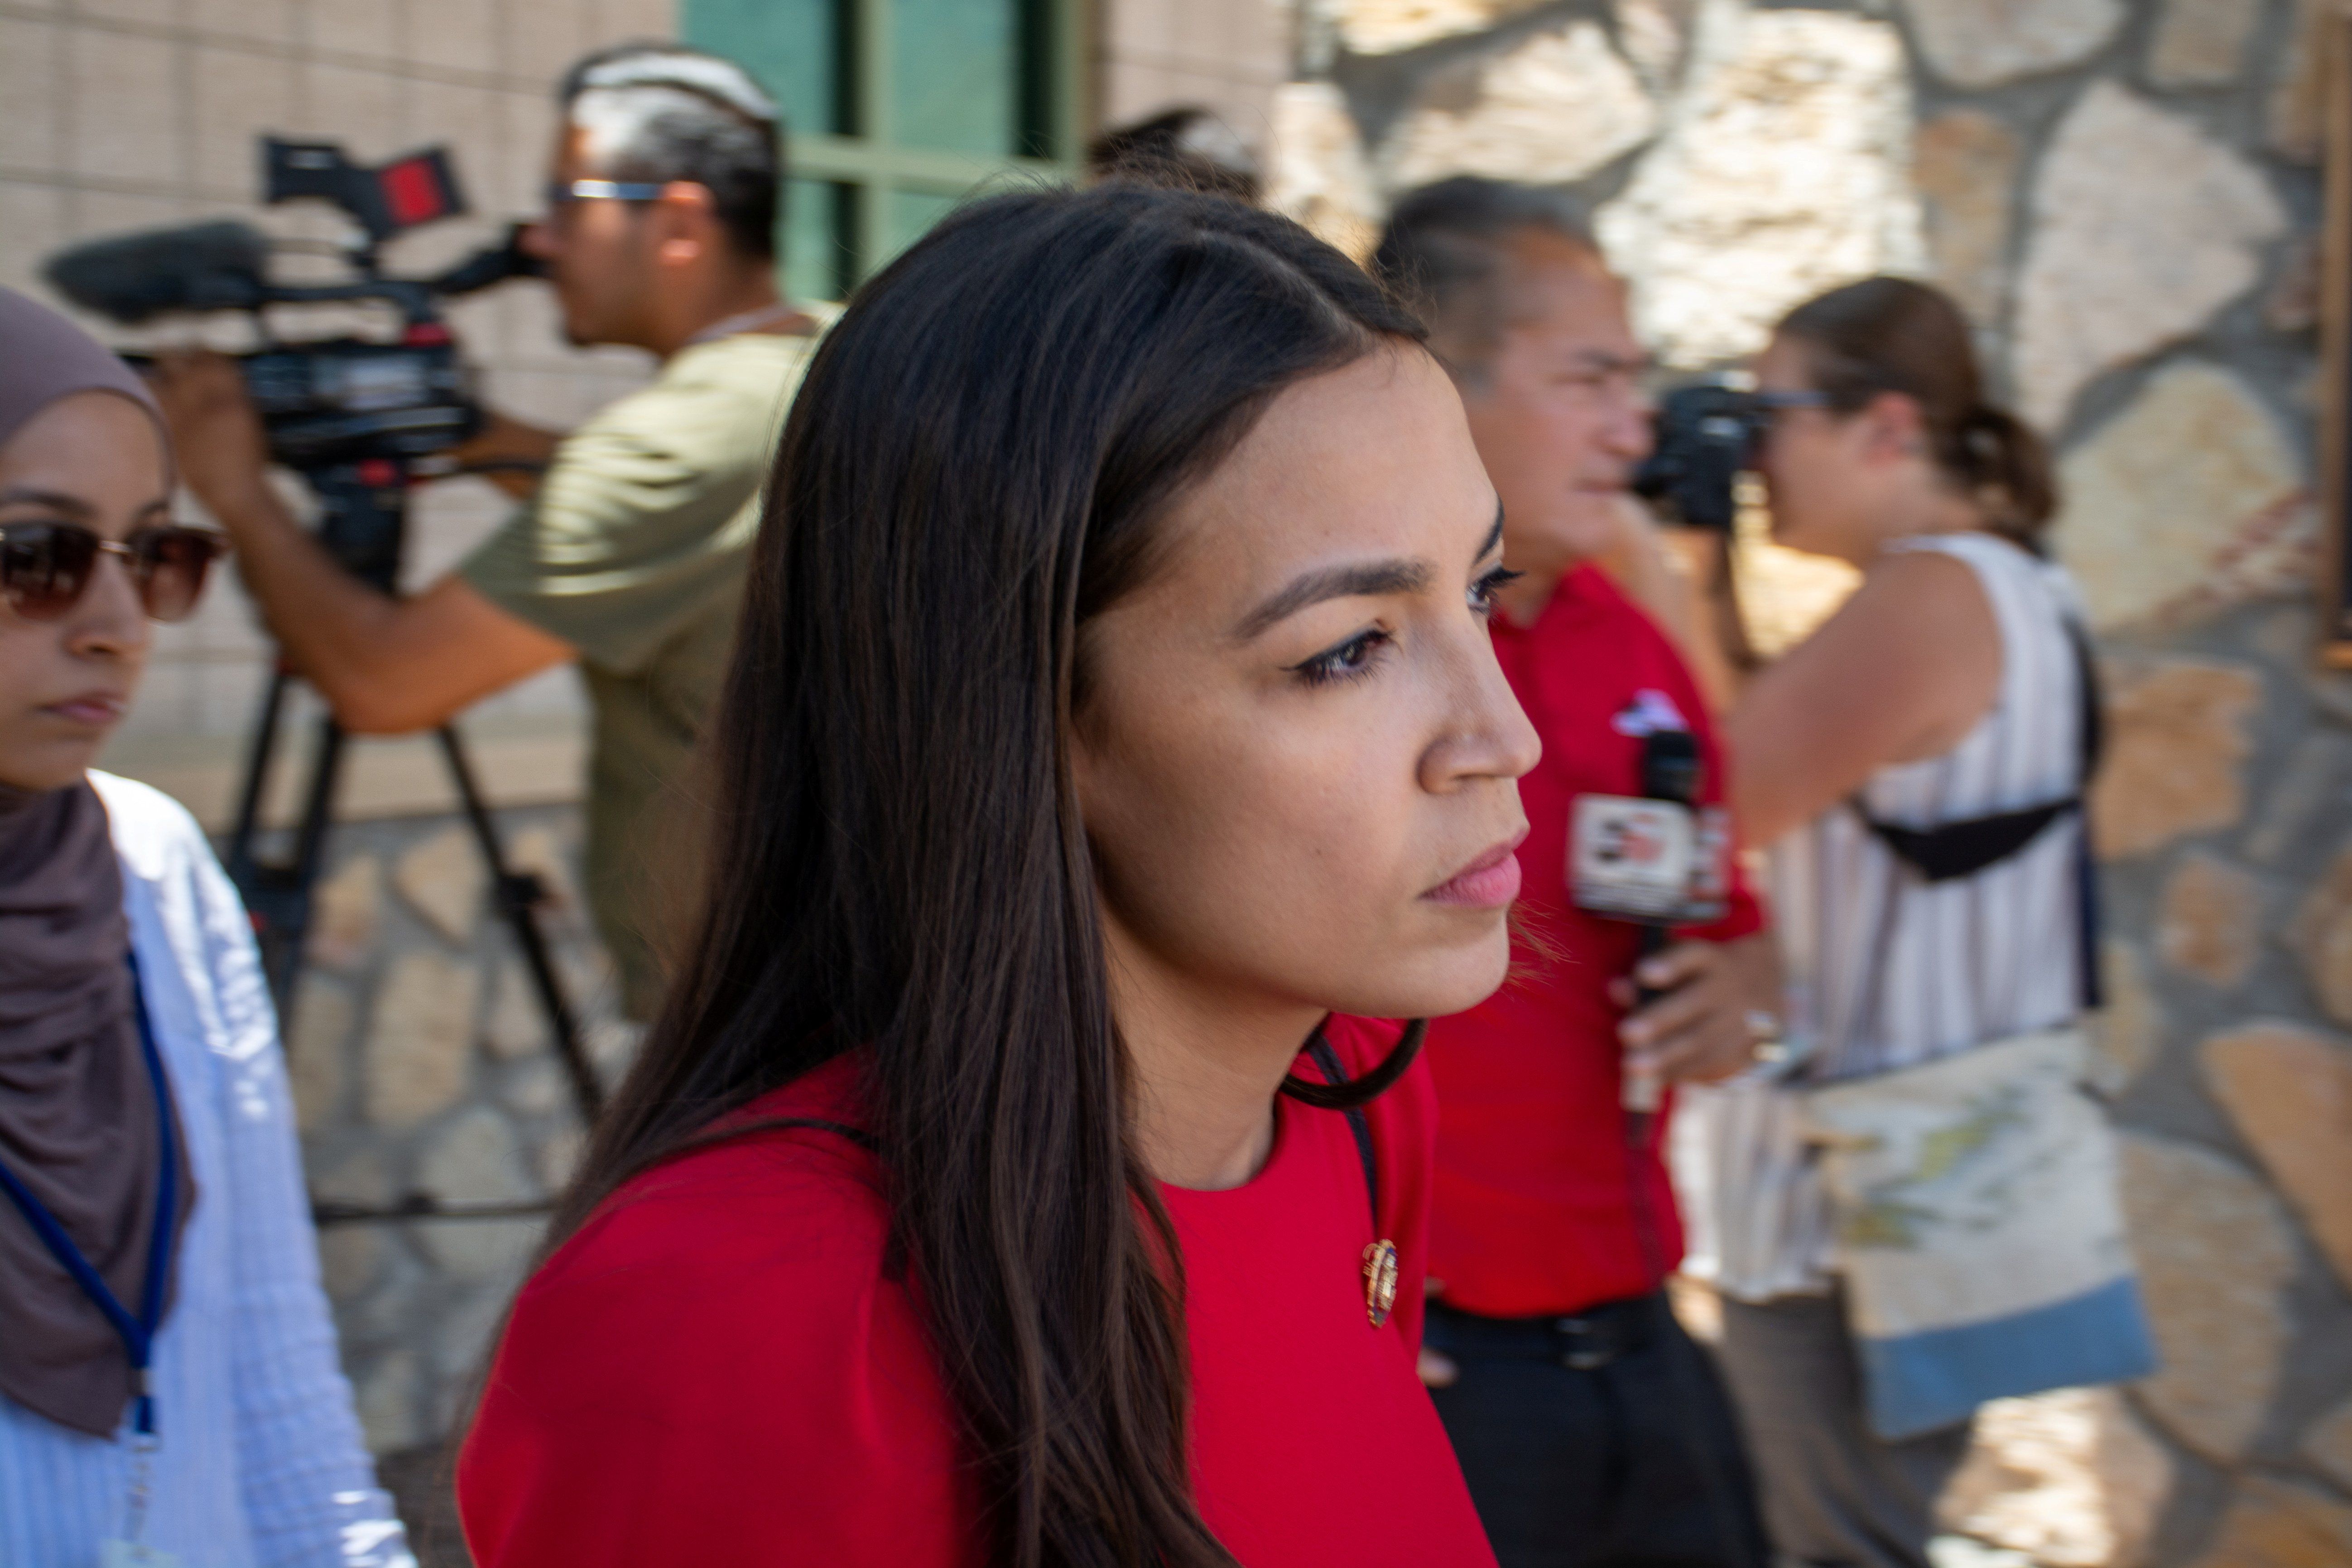 U.S. Representative Alexandria Ocasio-Cortez leaves the El Paso border patrol station during a tour of two facilities with other members of Congress in El Paso, Texas, July 1, 2019. 